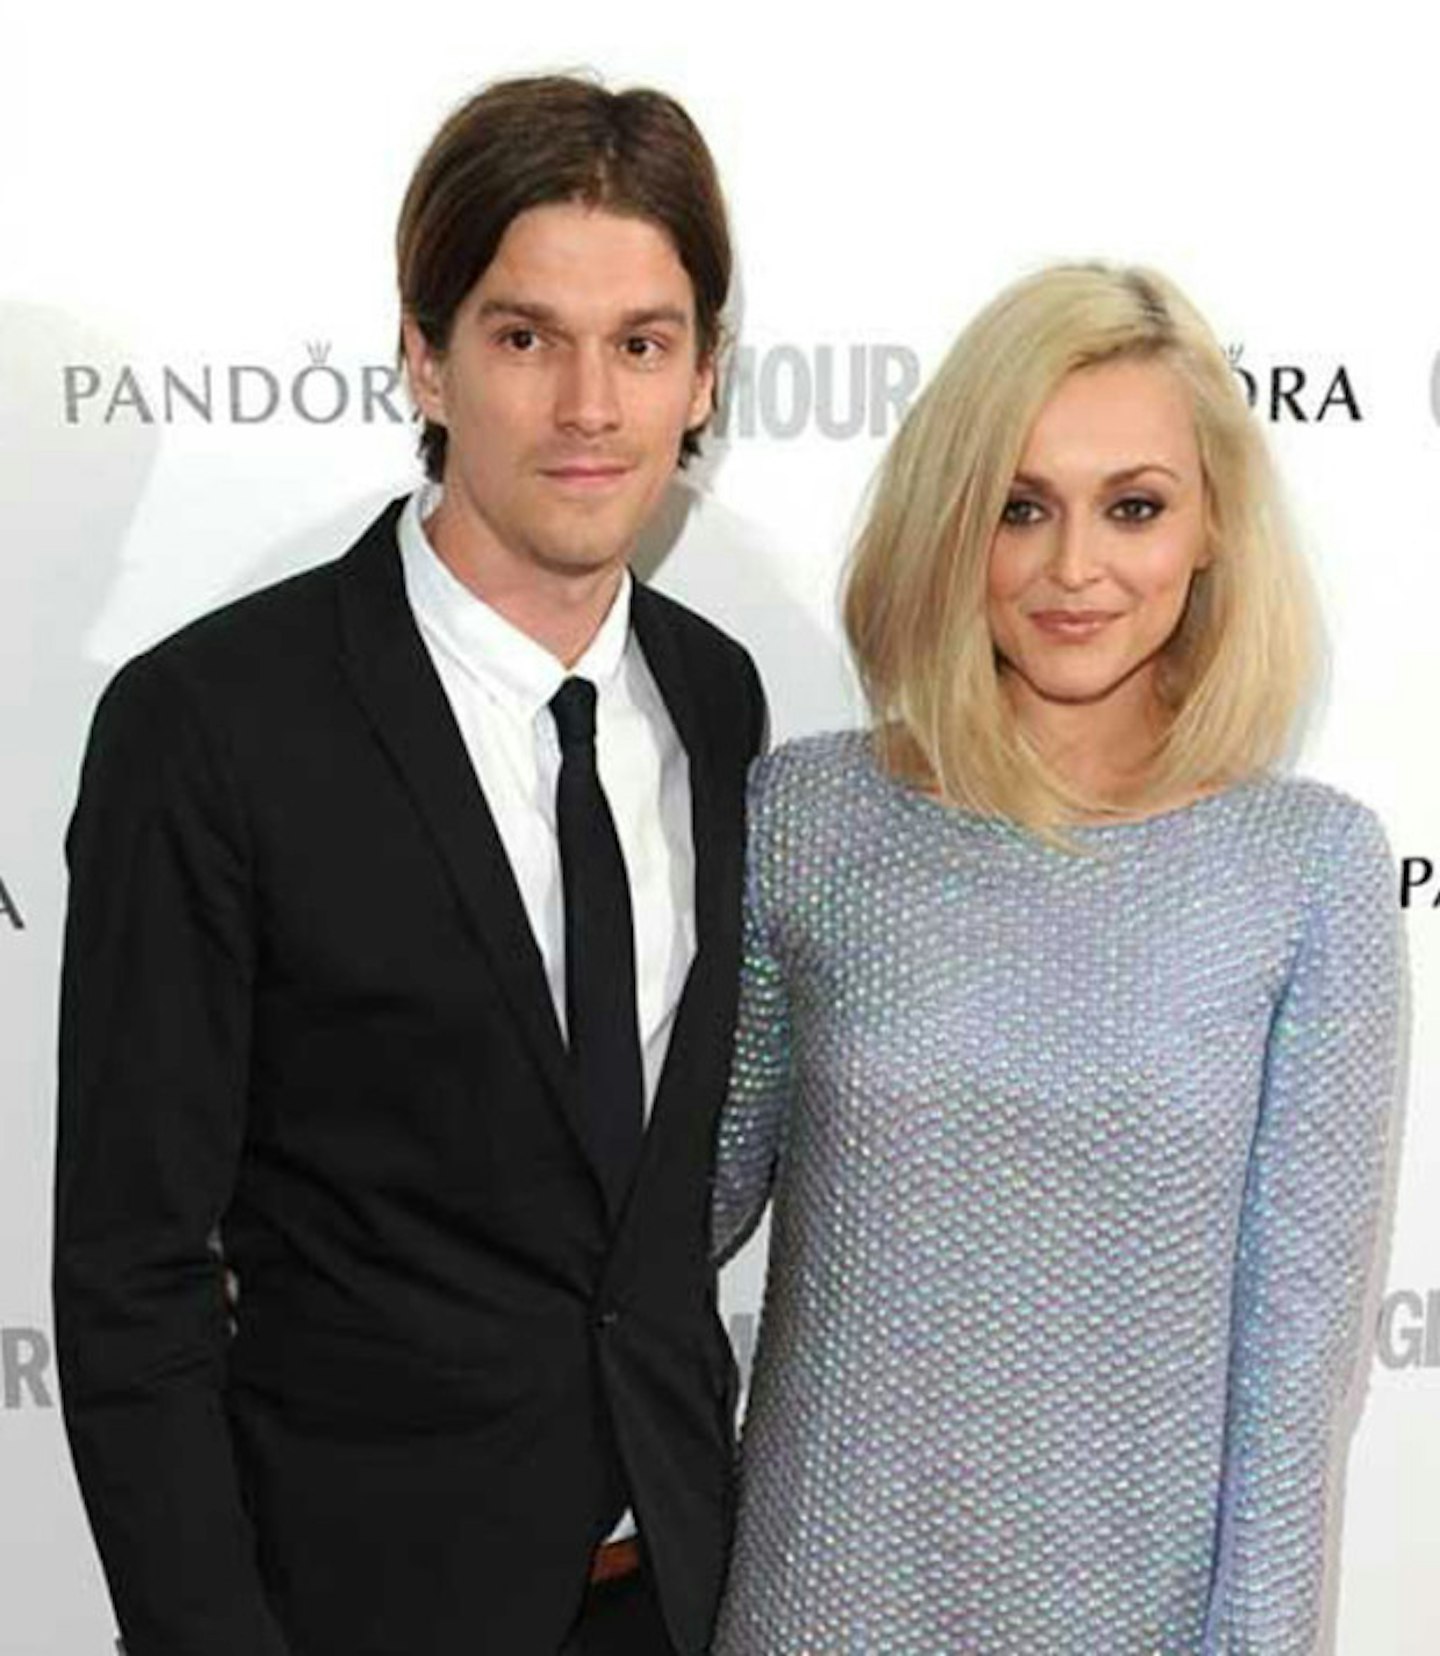 February 2013: Fearne Cotton welcomed son Rex